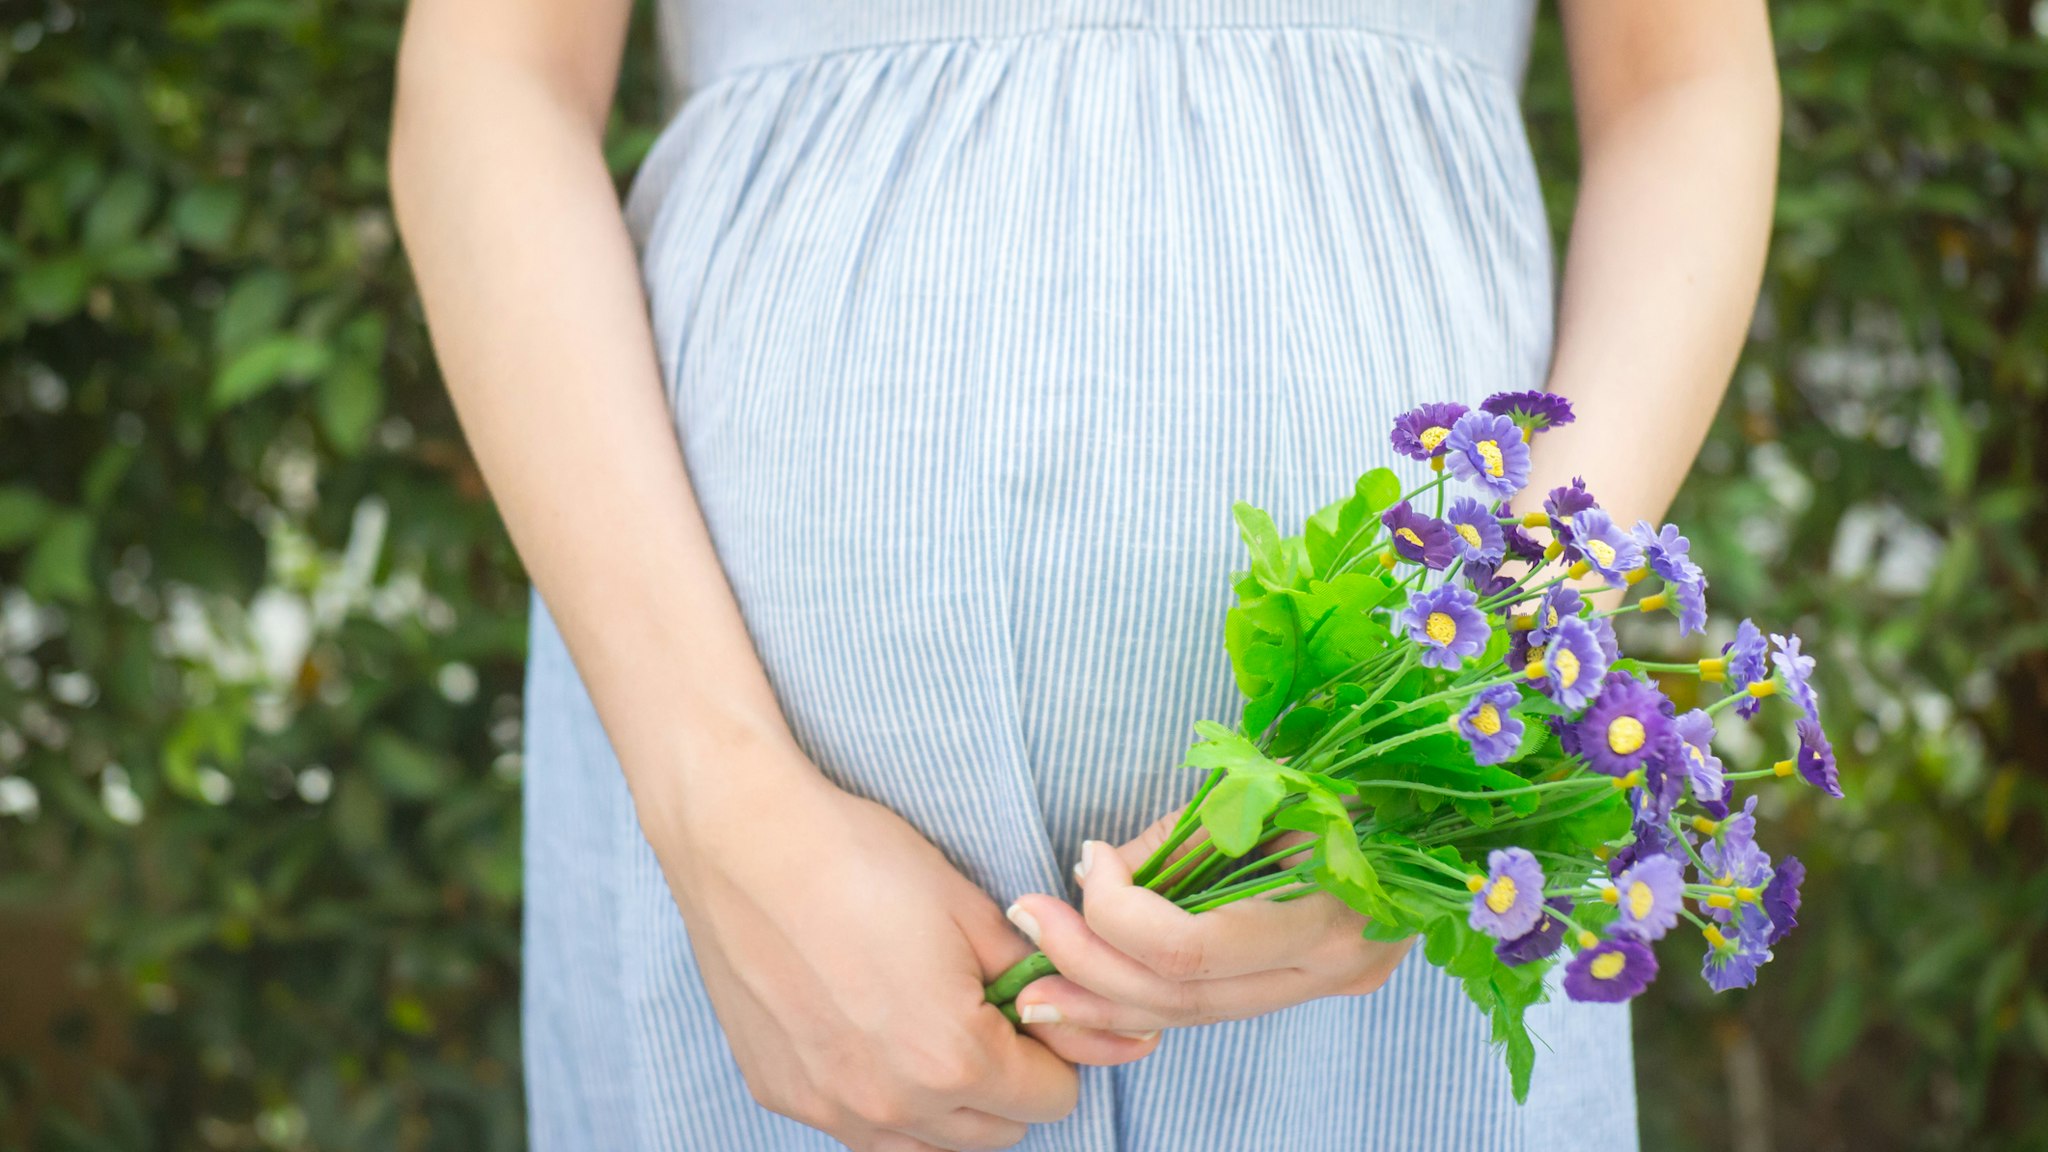 Midsection Of Pregnant Woman Holding Artificial Purple Flowers At Park - stock photo